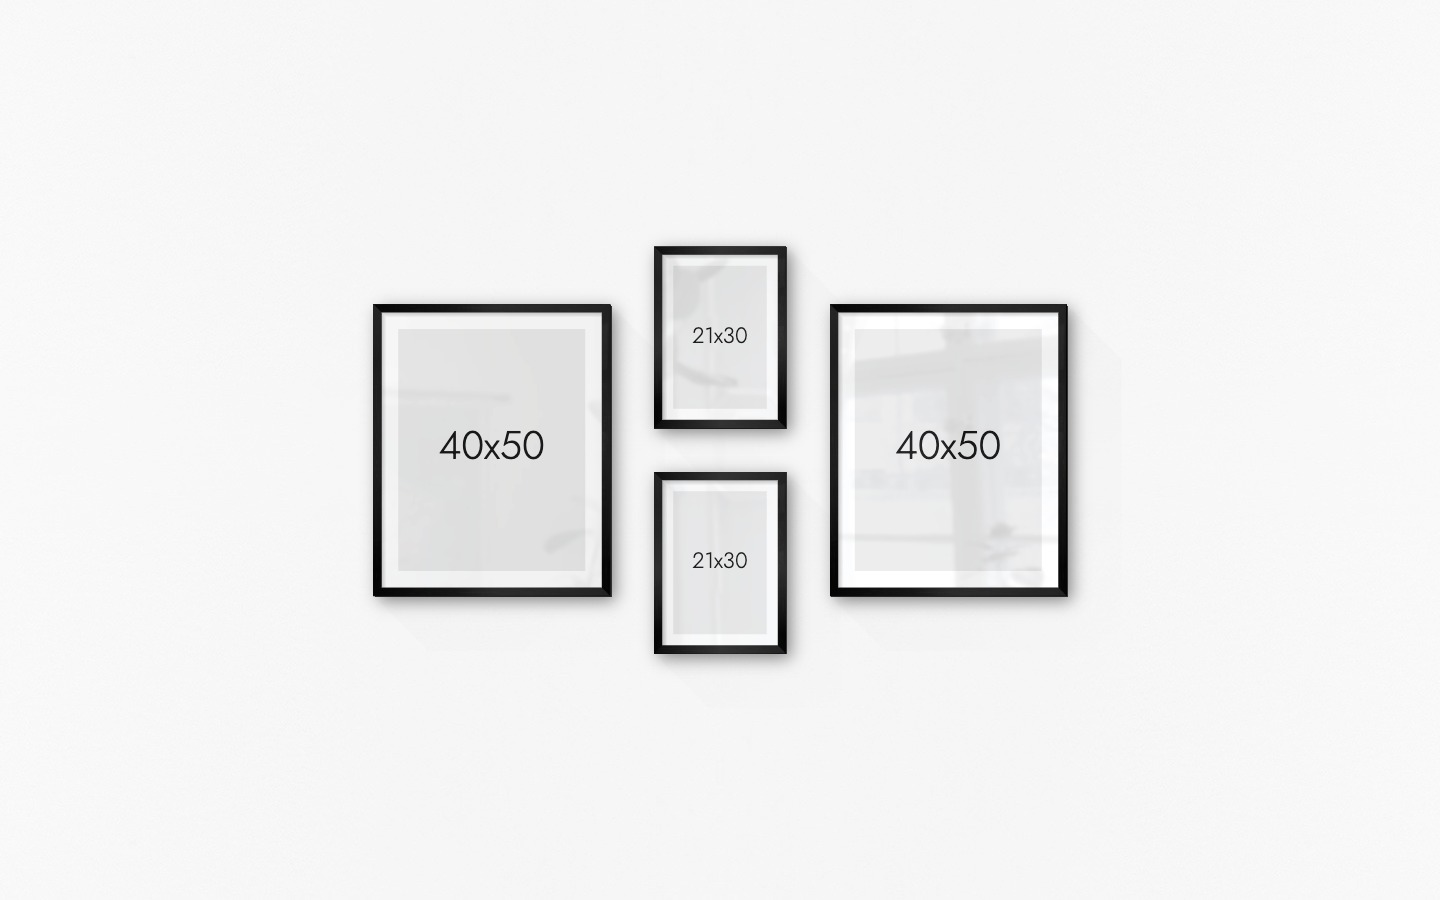 Gallery wall with picture frames in black in sizes 40x50 and 21x30